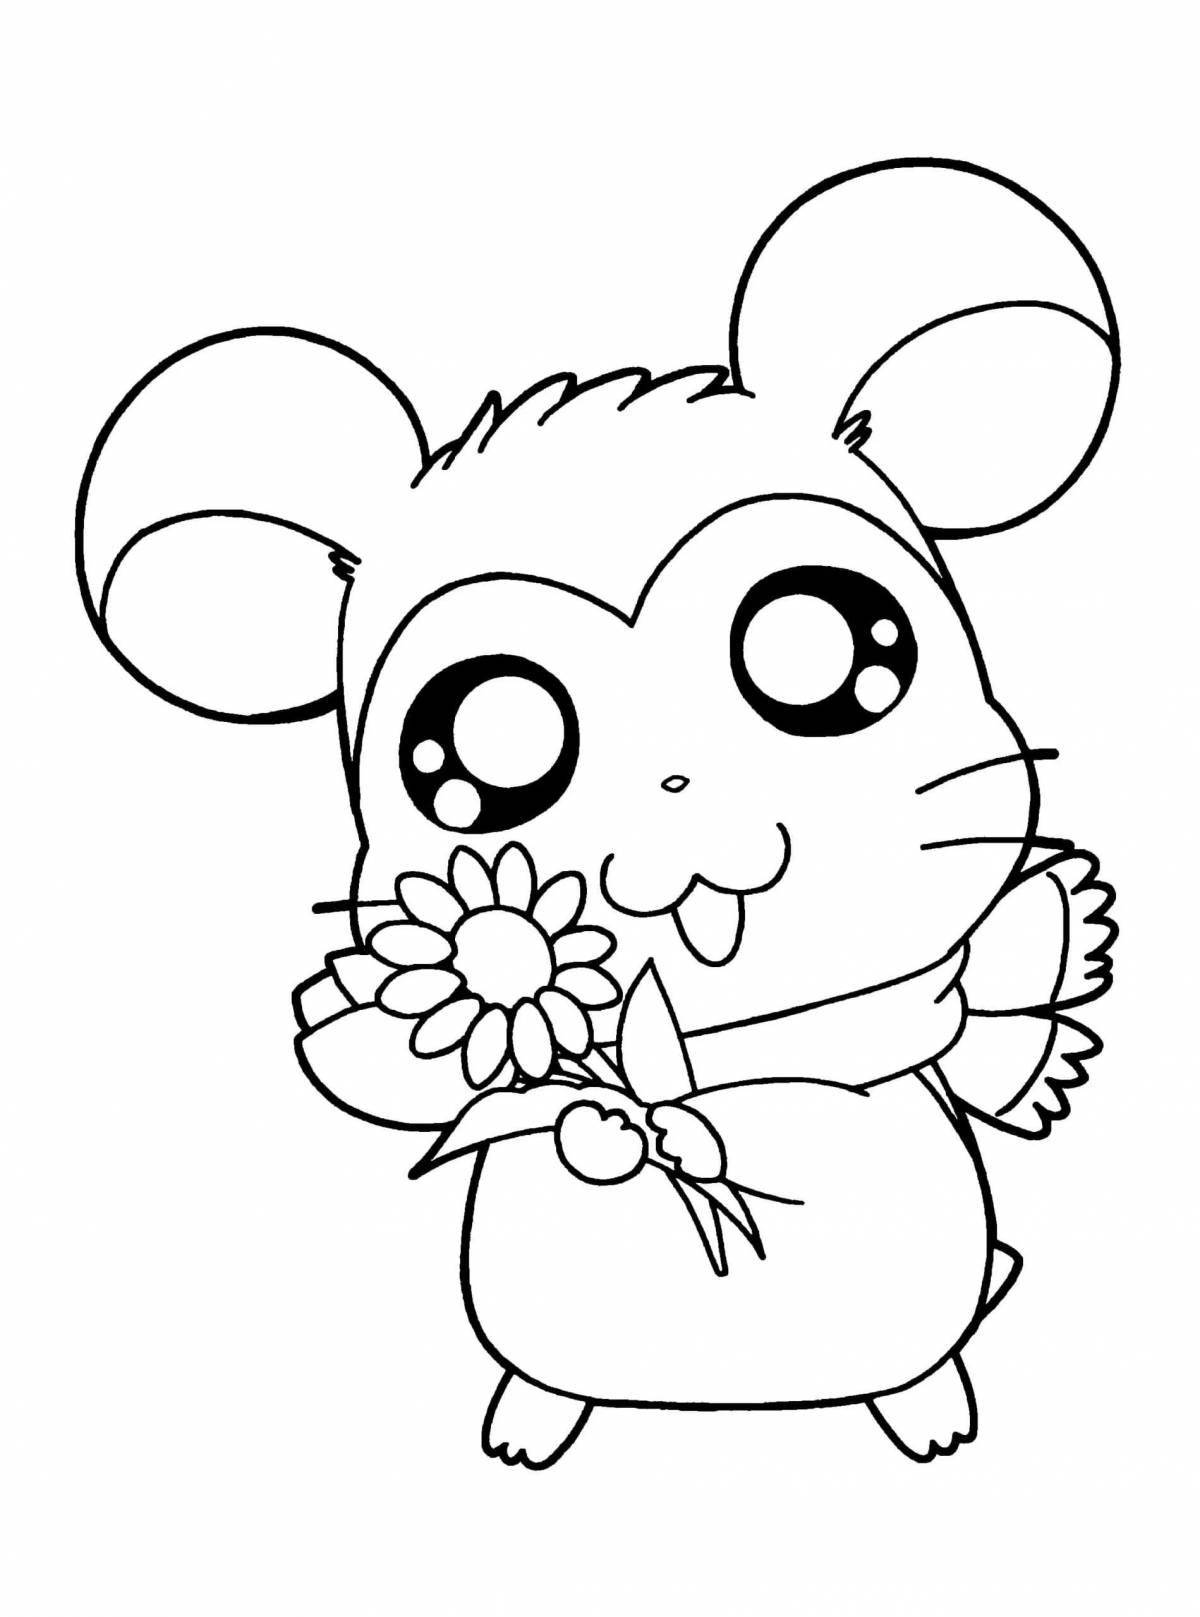 Furry mouse coloring pages